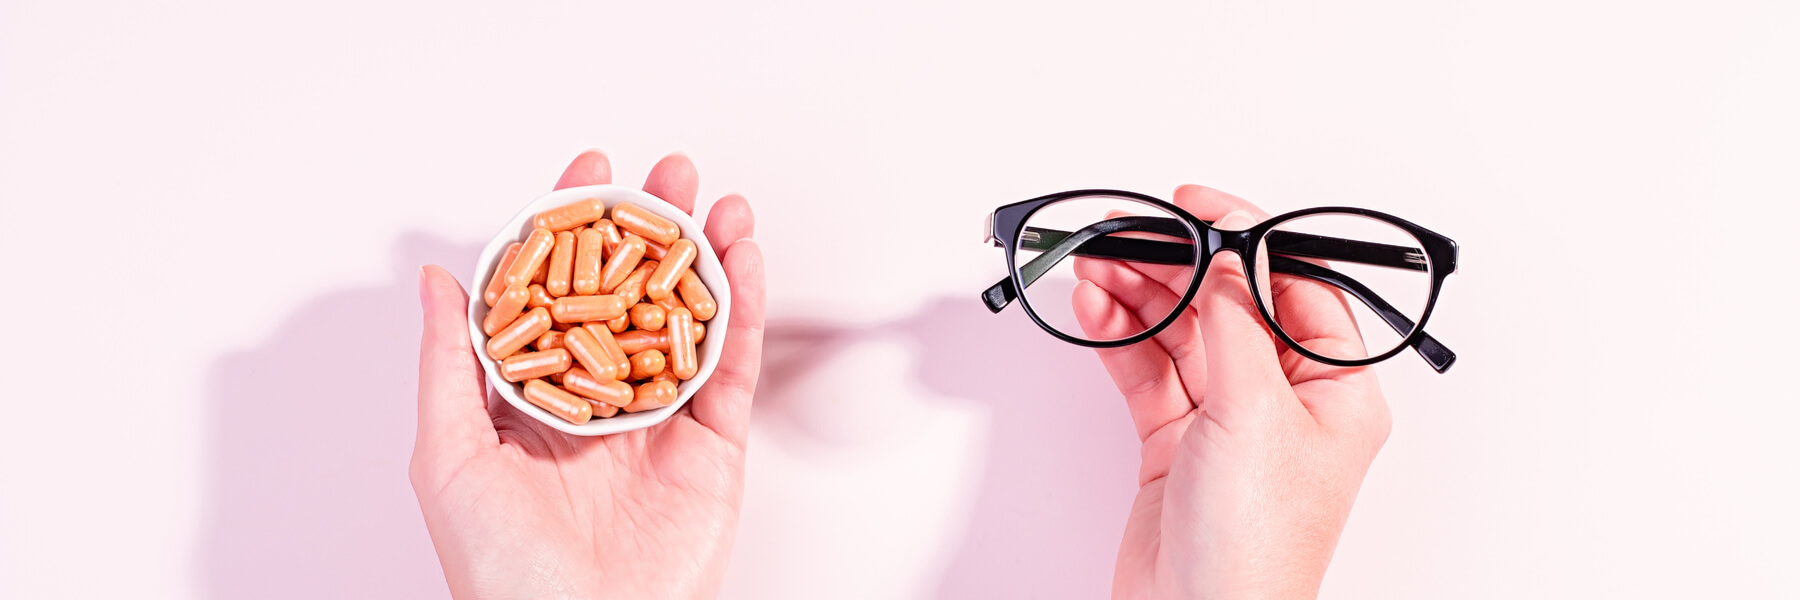 holding glasses in one hand and vitamins in the other hand